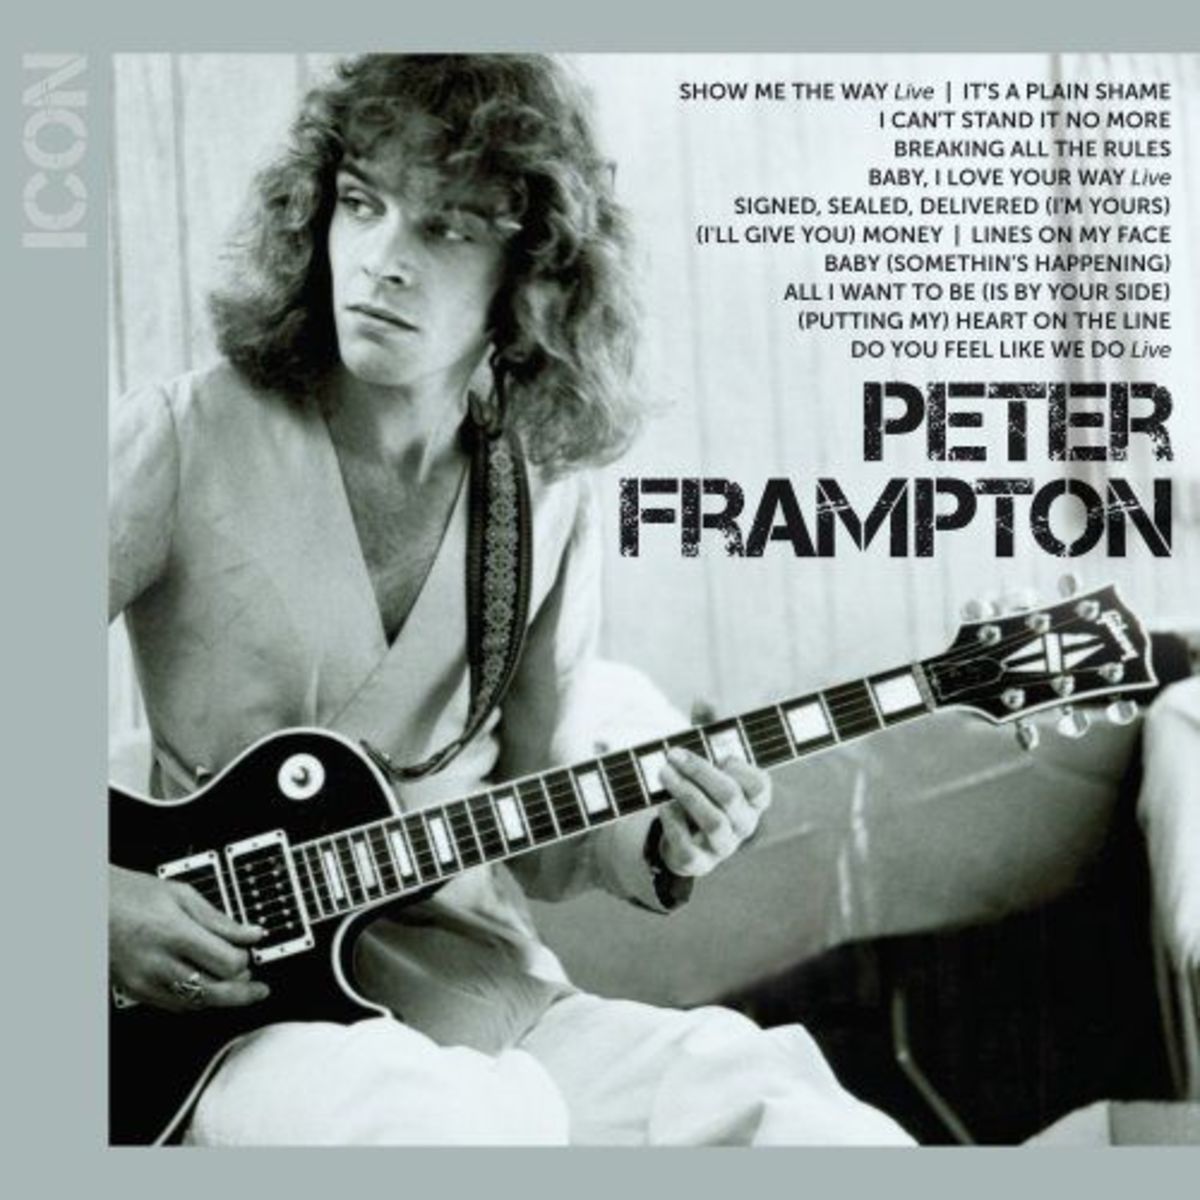 Peter Frampton's "Do You Feel Like We Do" has a multitude of melodic leads that I never get tired of listening to so many years later.  